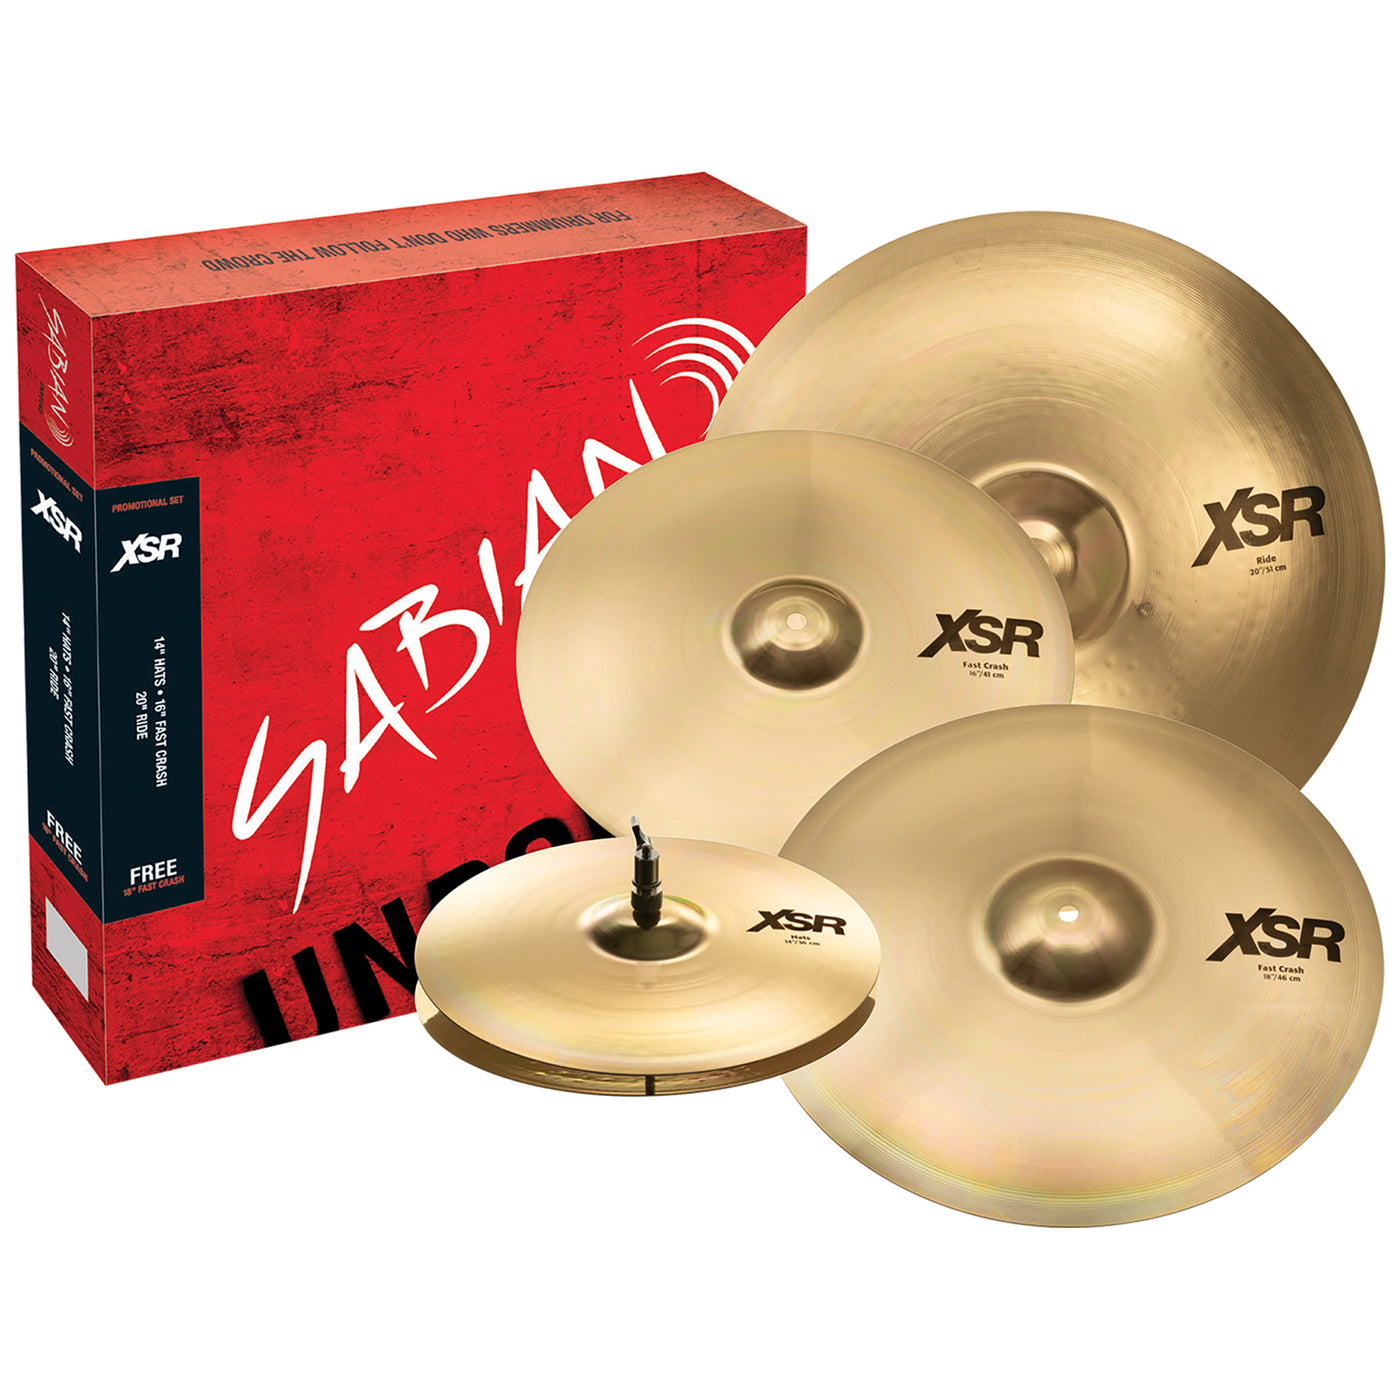 Sabian XSR Performance Cymbal Pack with Free 18" Cymbal